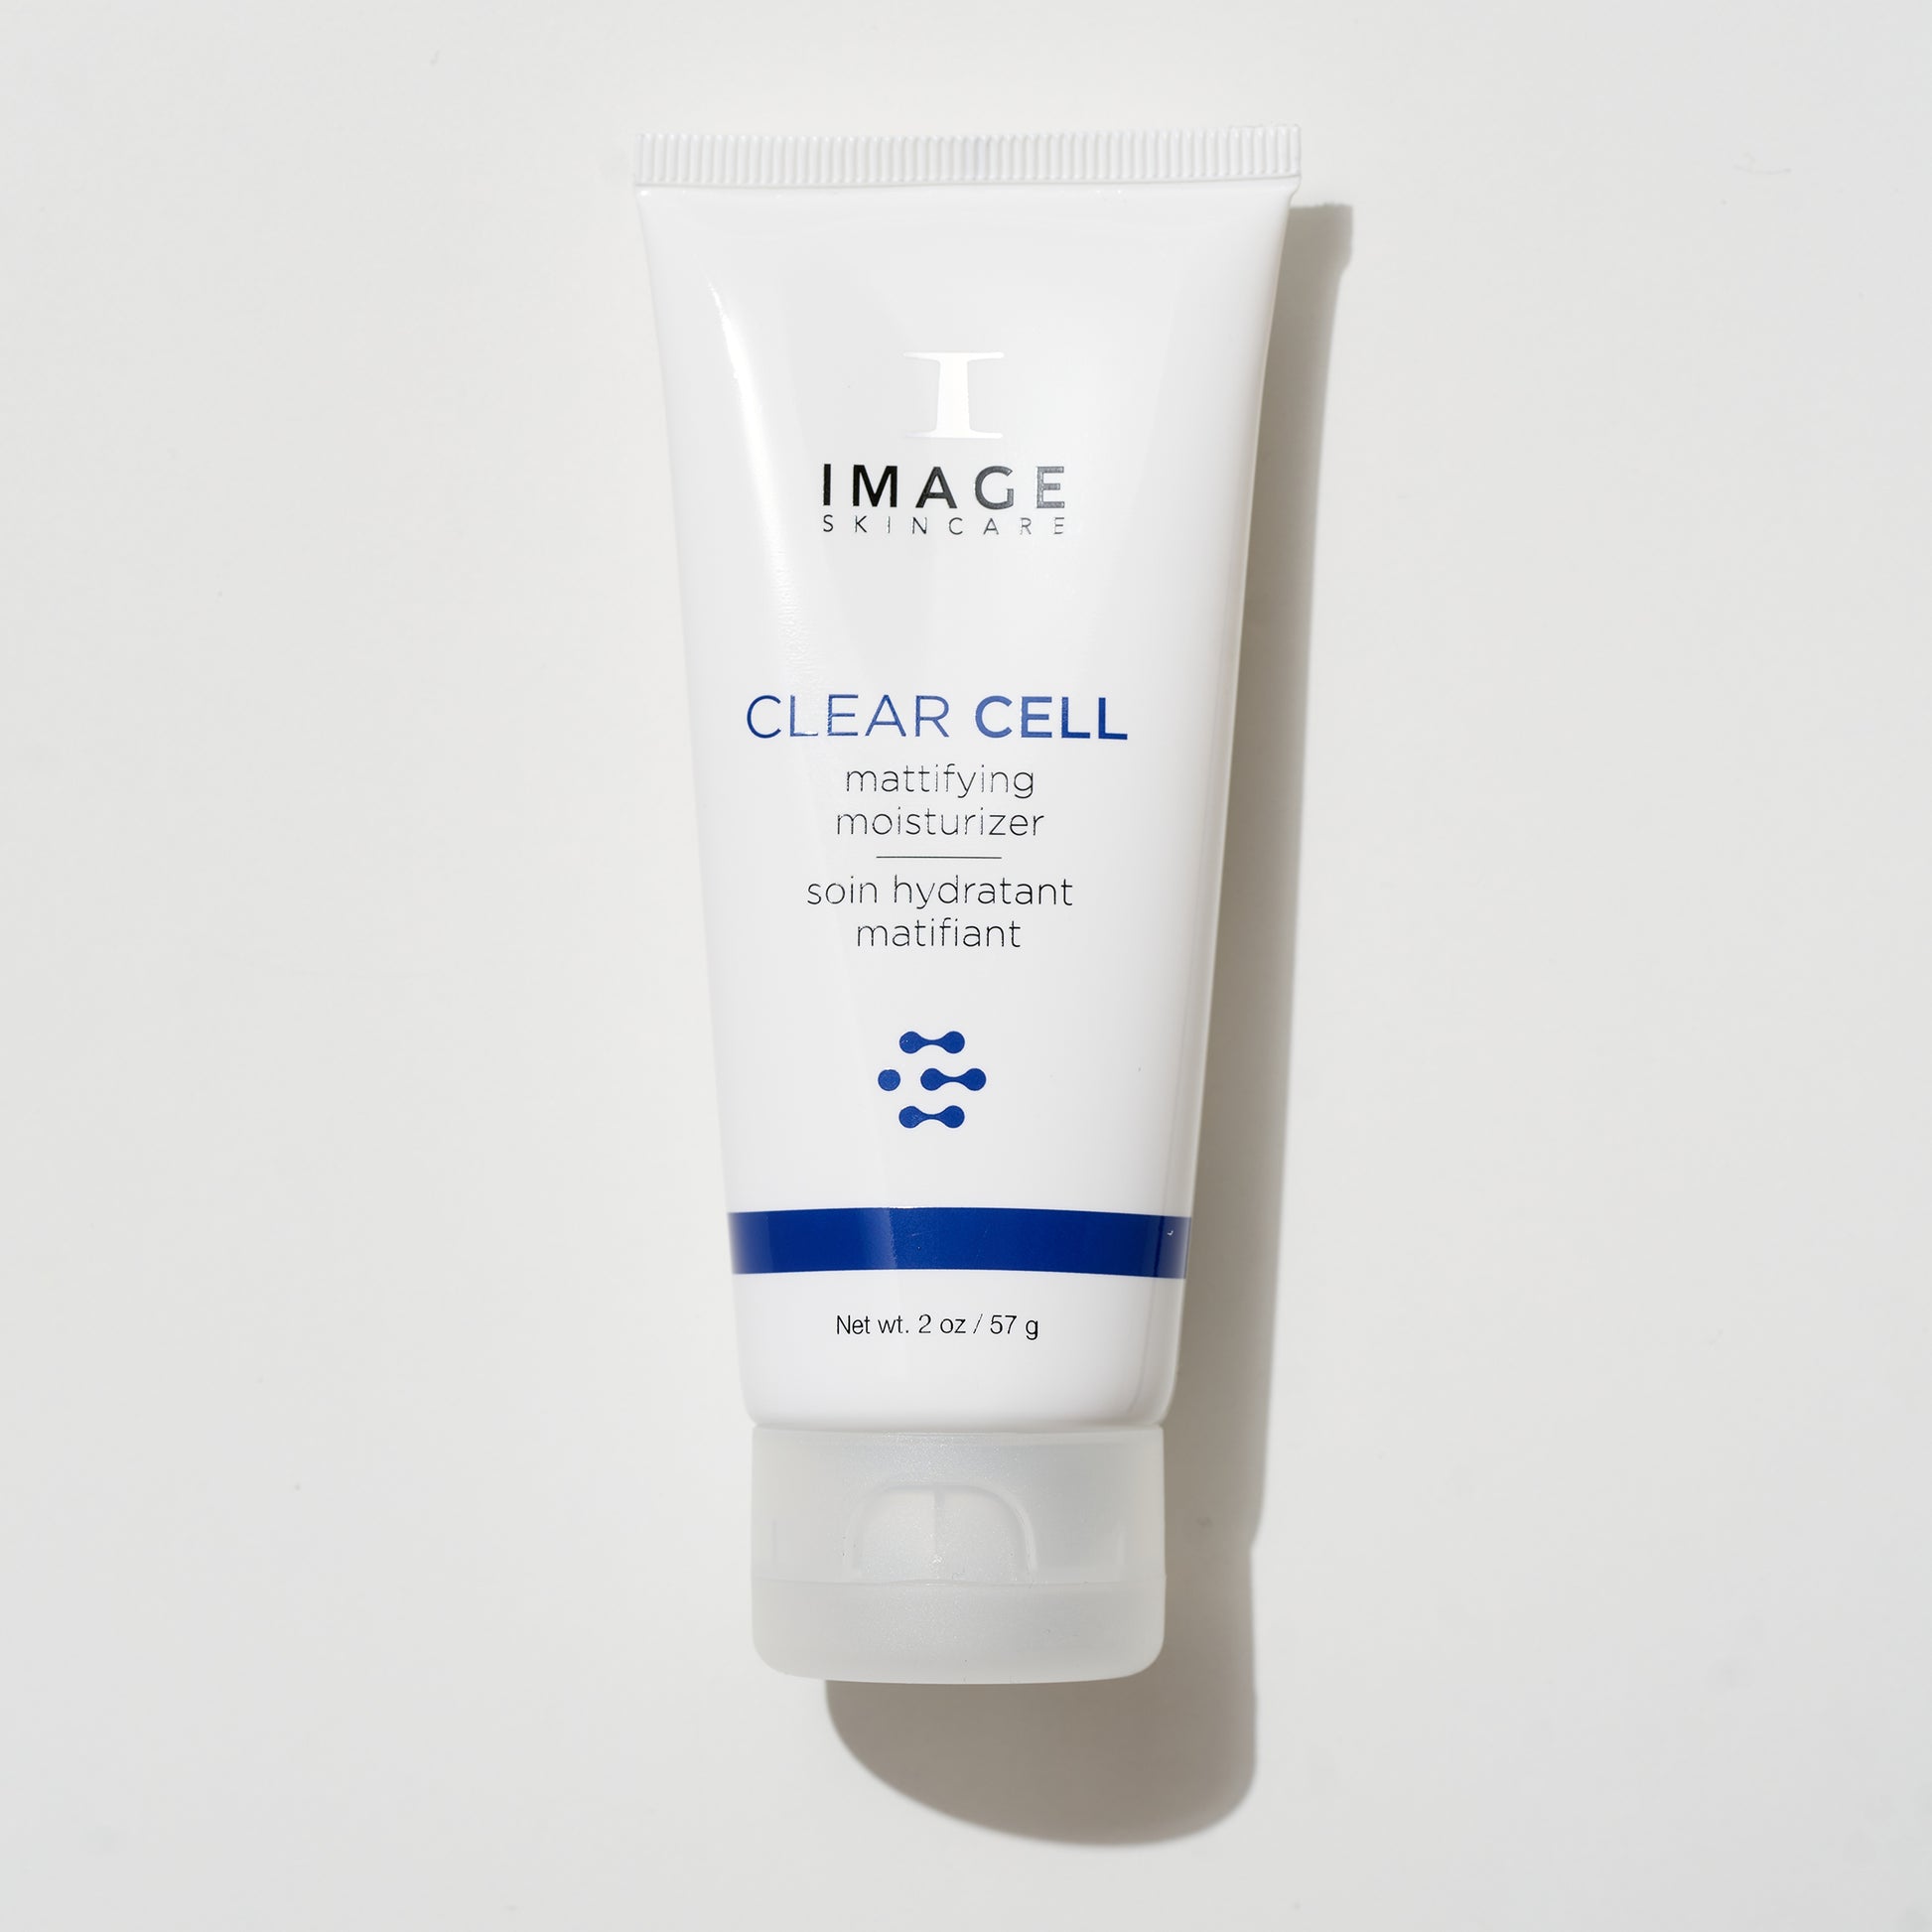 CLEAR CELL Mattifying Moisturizer, Image Skincare